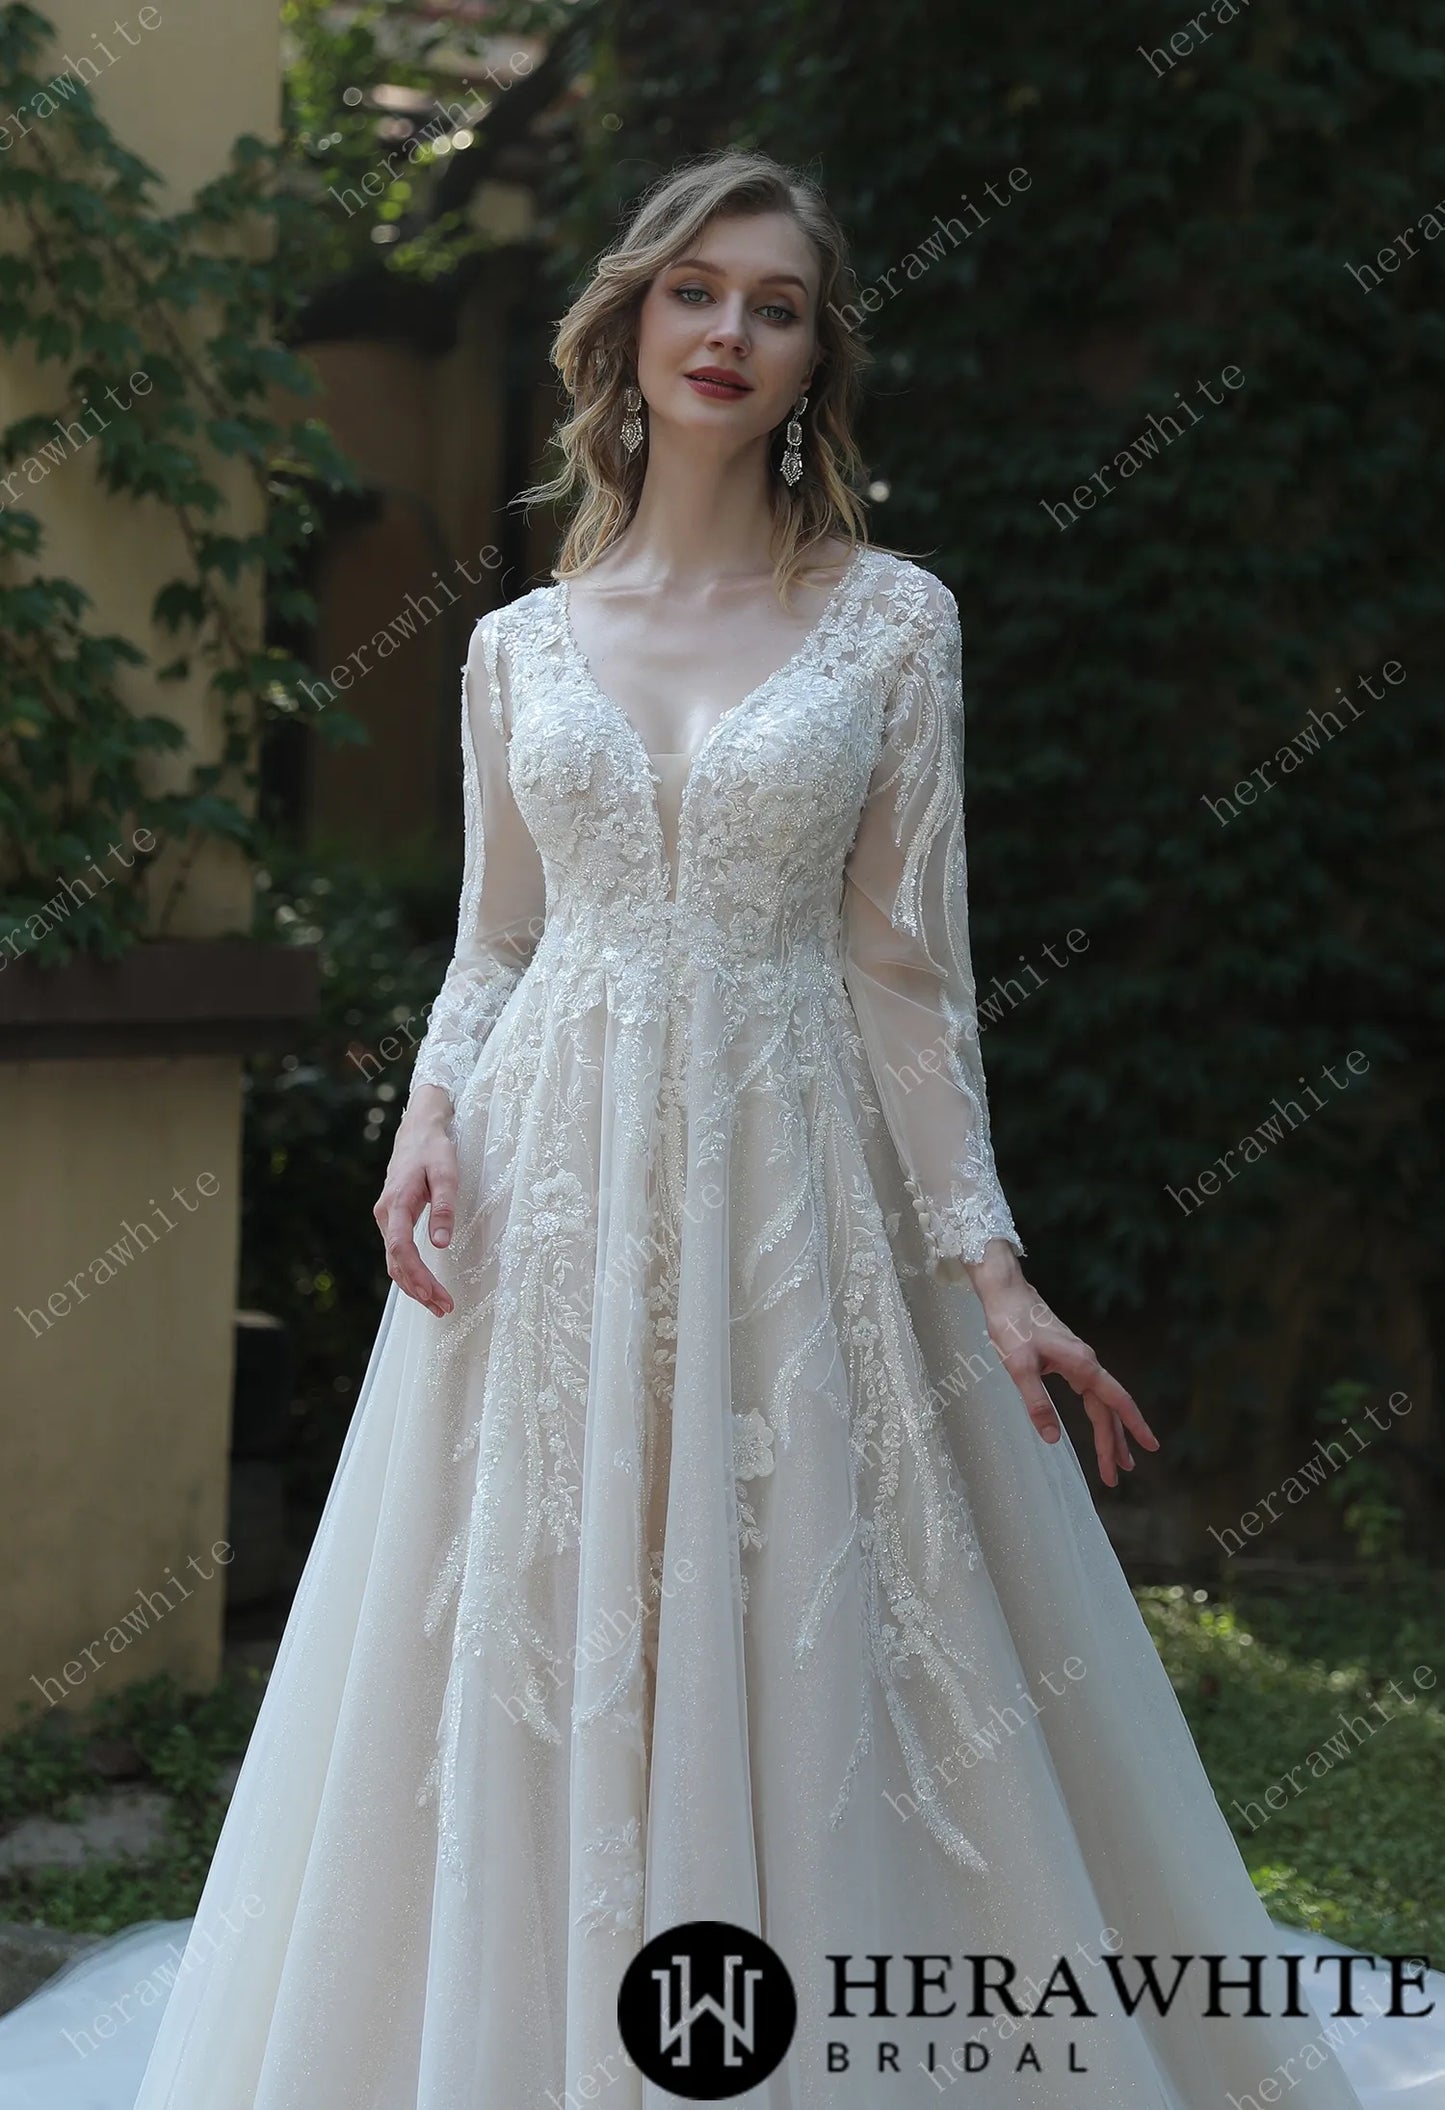 A Timeless Lace A-Line Gown With Plunging V-Neck